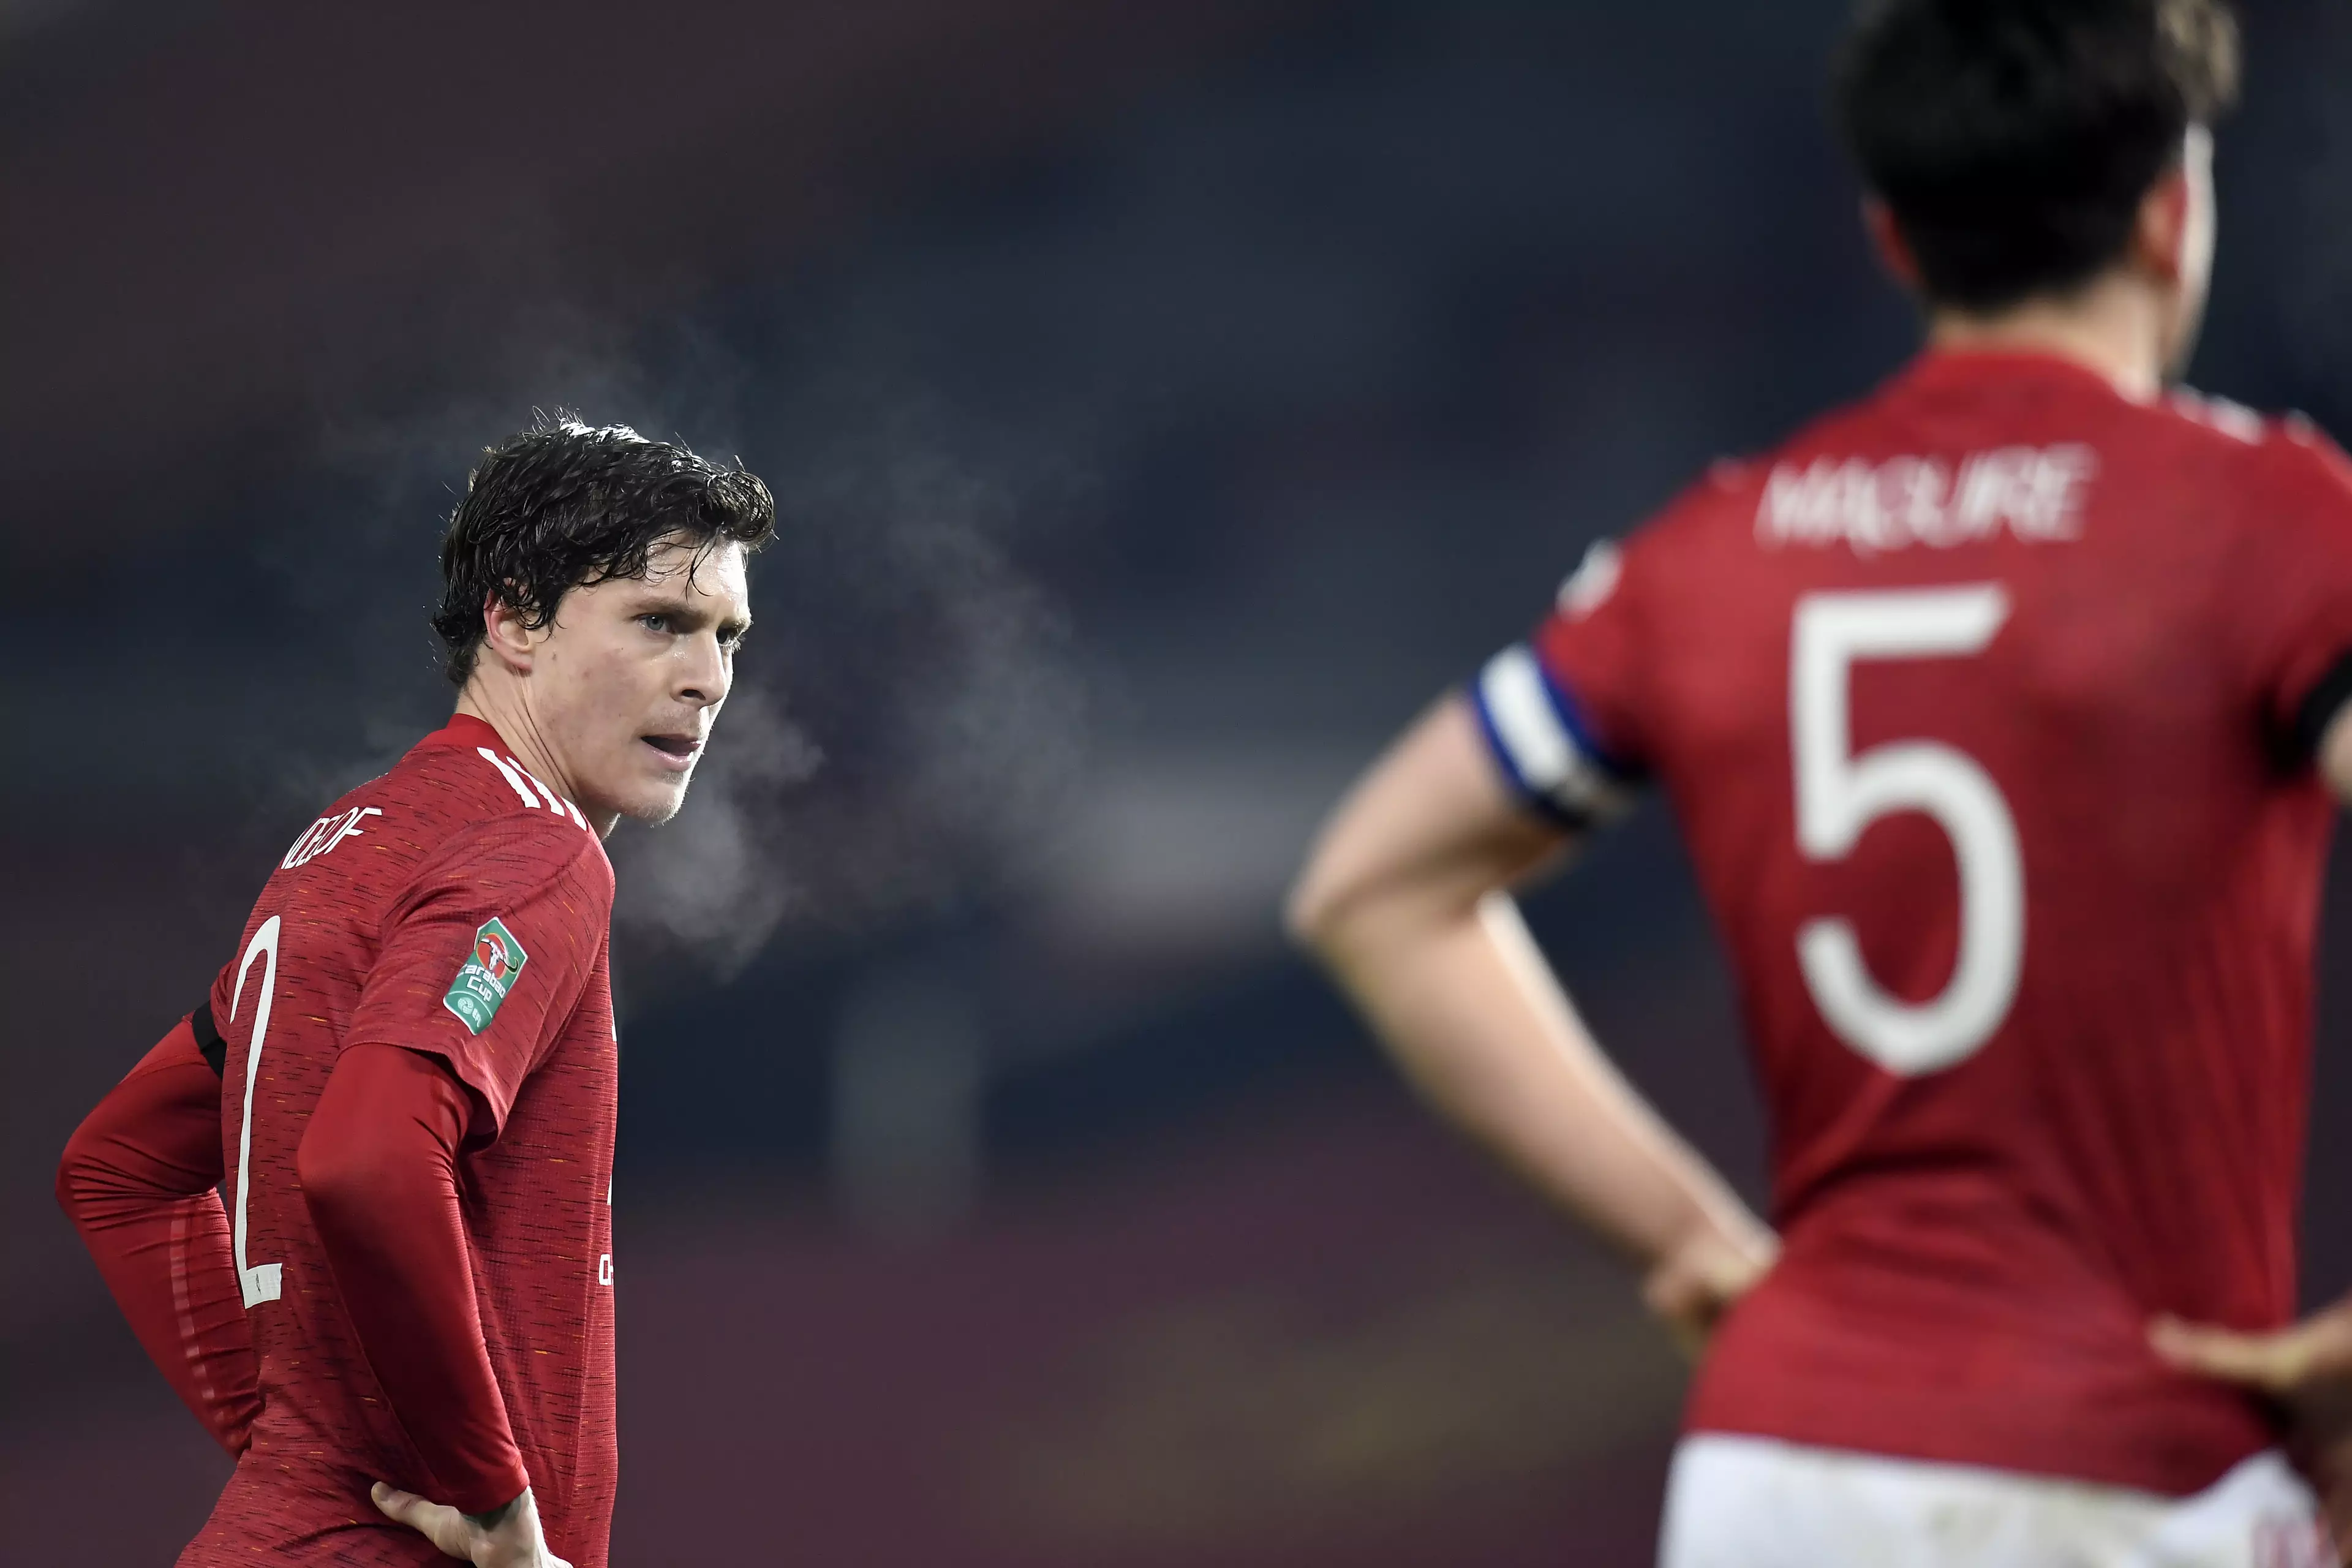 Maguire and Lindelof's partnership has often been questioned. Image: PA Images